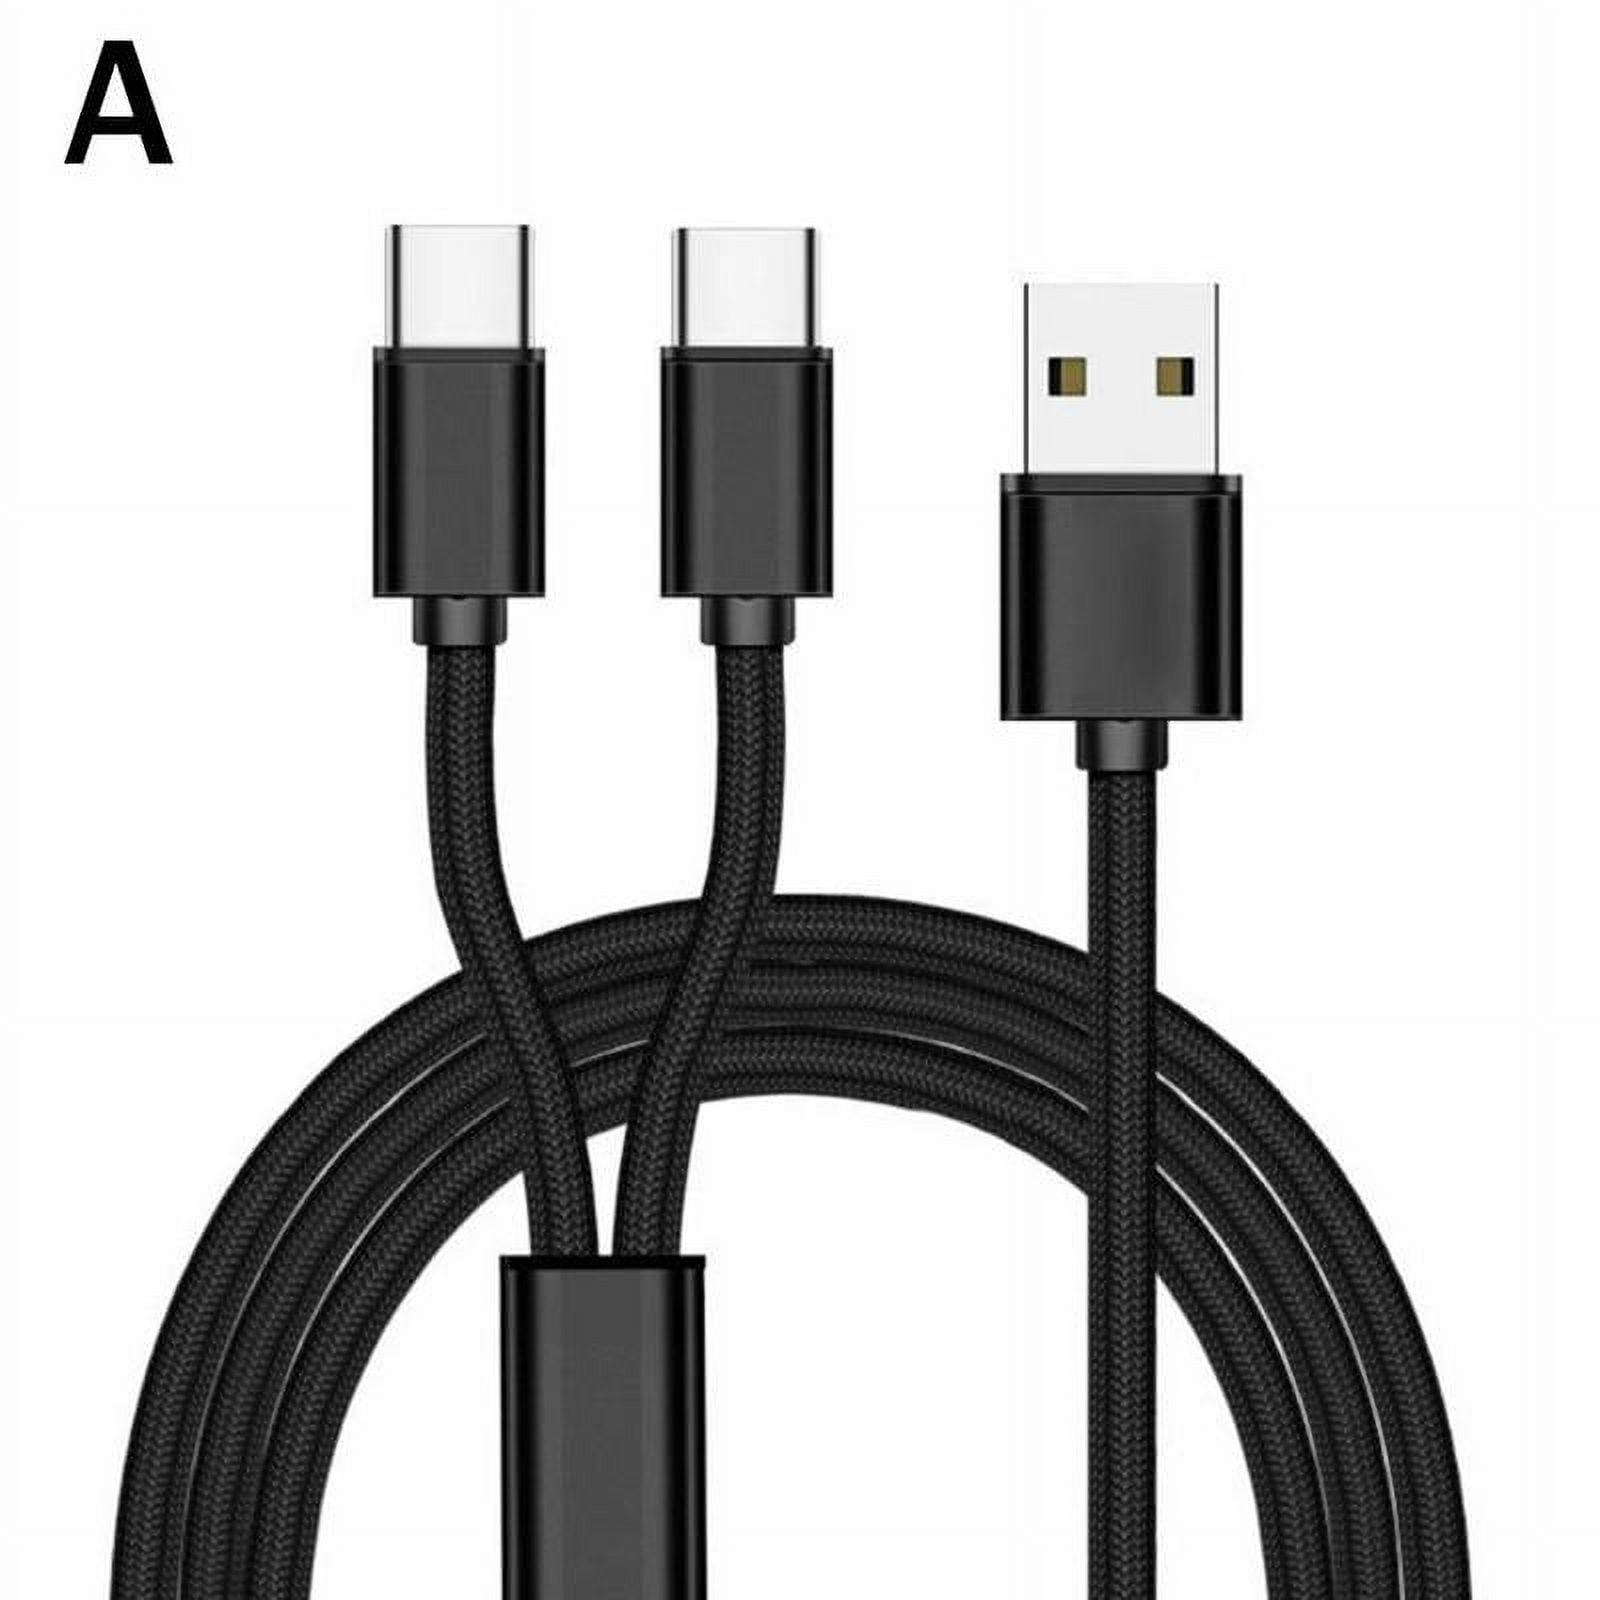 USB 2.0 A Male to Dual USB-C Male Y-Splitter Cable 0.5/1M Gray Aluminum  Alloy Type